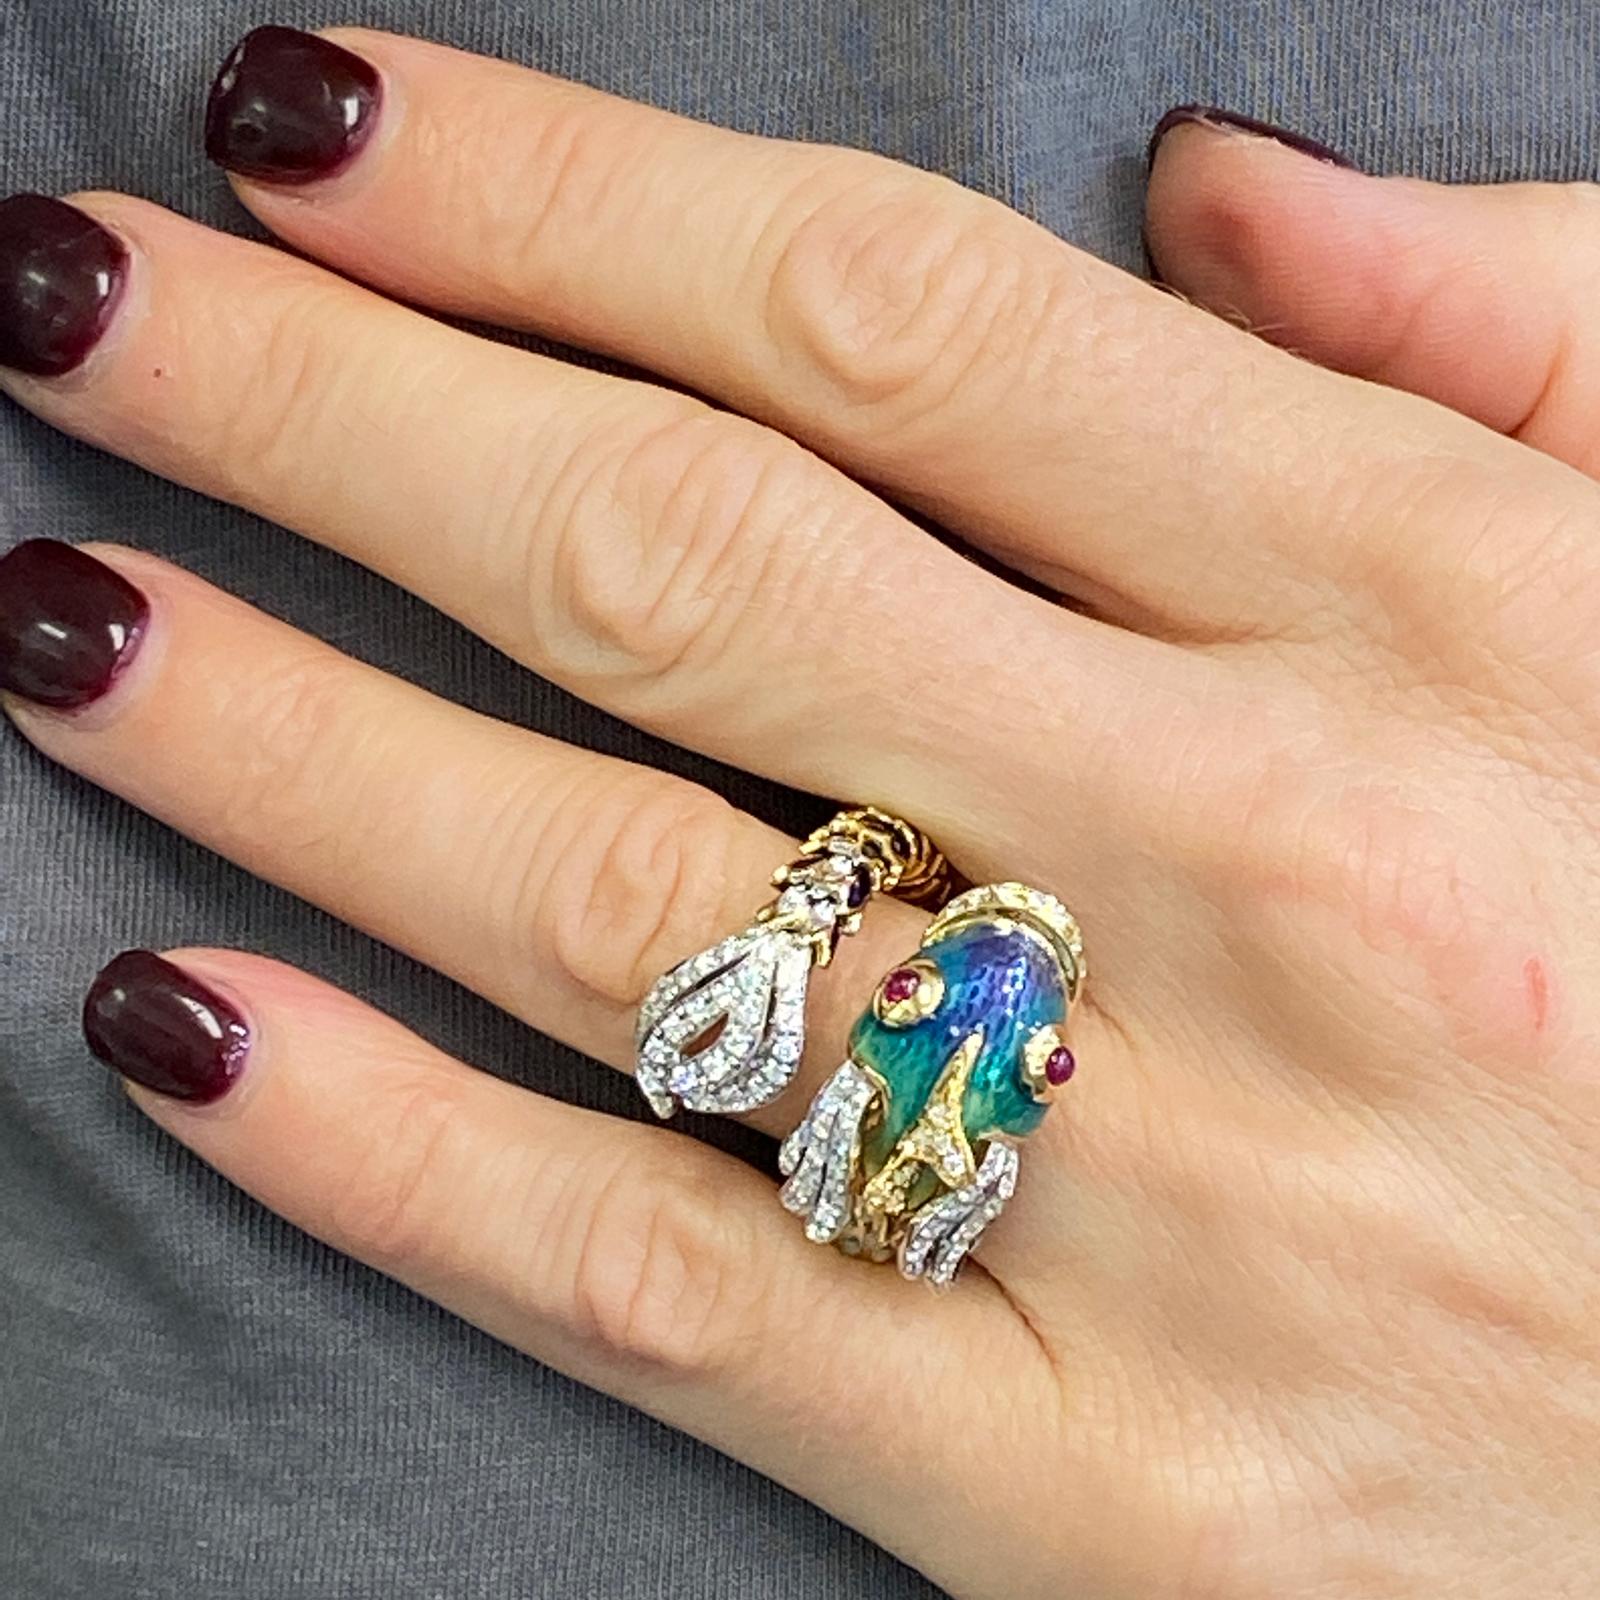 Fabulous and colorful Diamond Enamel Nemo ring by Italian designer Roberto Coin. The ring features 75 round brilliant cut diamonds weigh .65 carats graded G-H color and VS clarity. The ring is crafted in 18 karat yellow gold, is adorned with blue